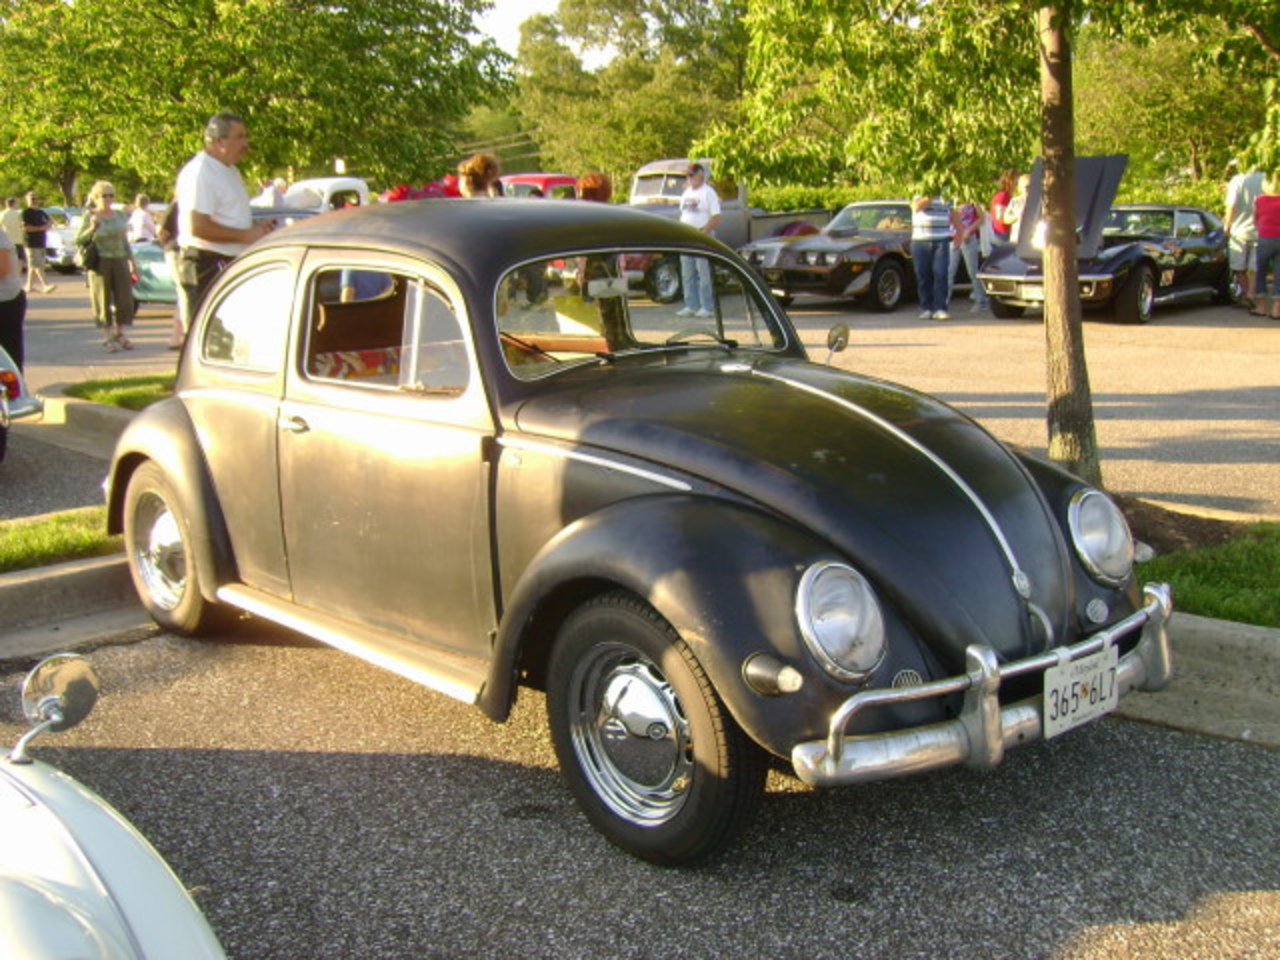 1955 VW Beetle Type 1 - a gallery on Flickr